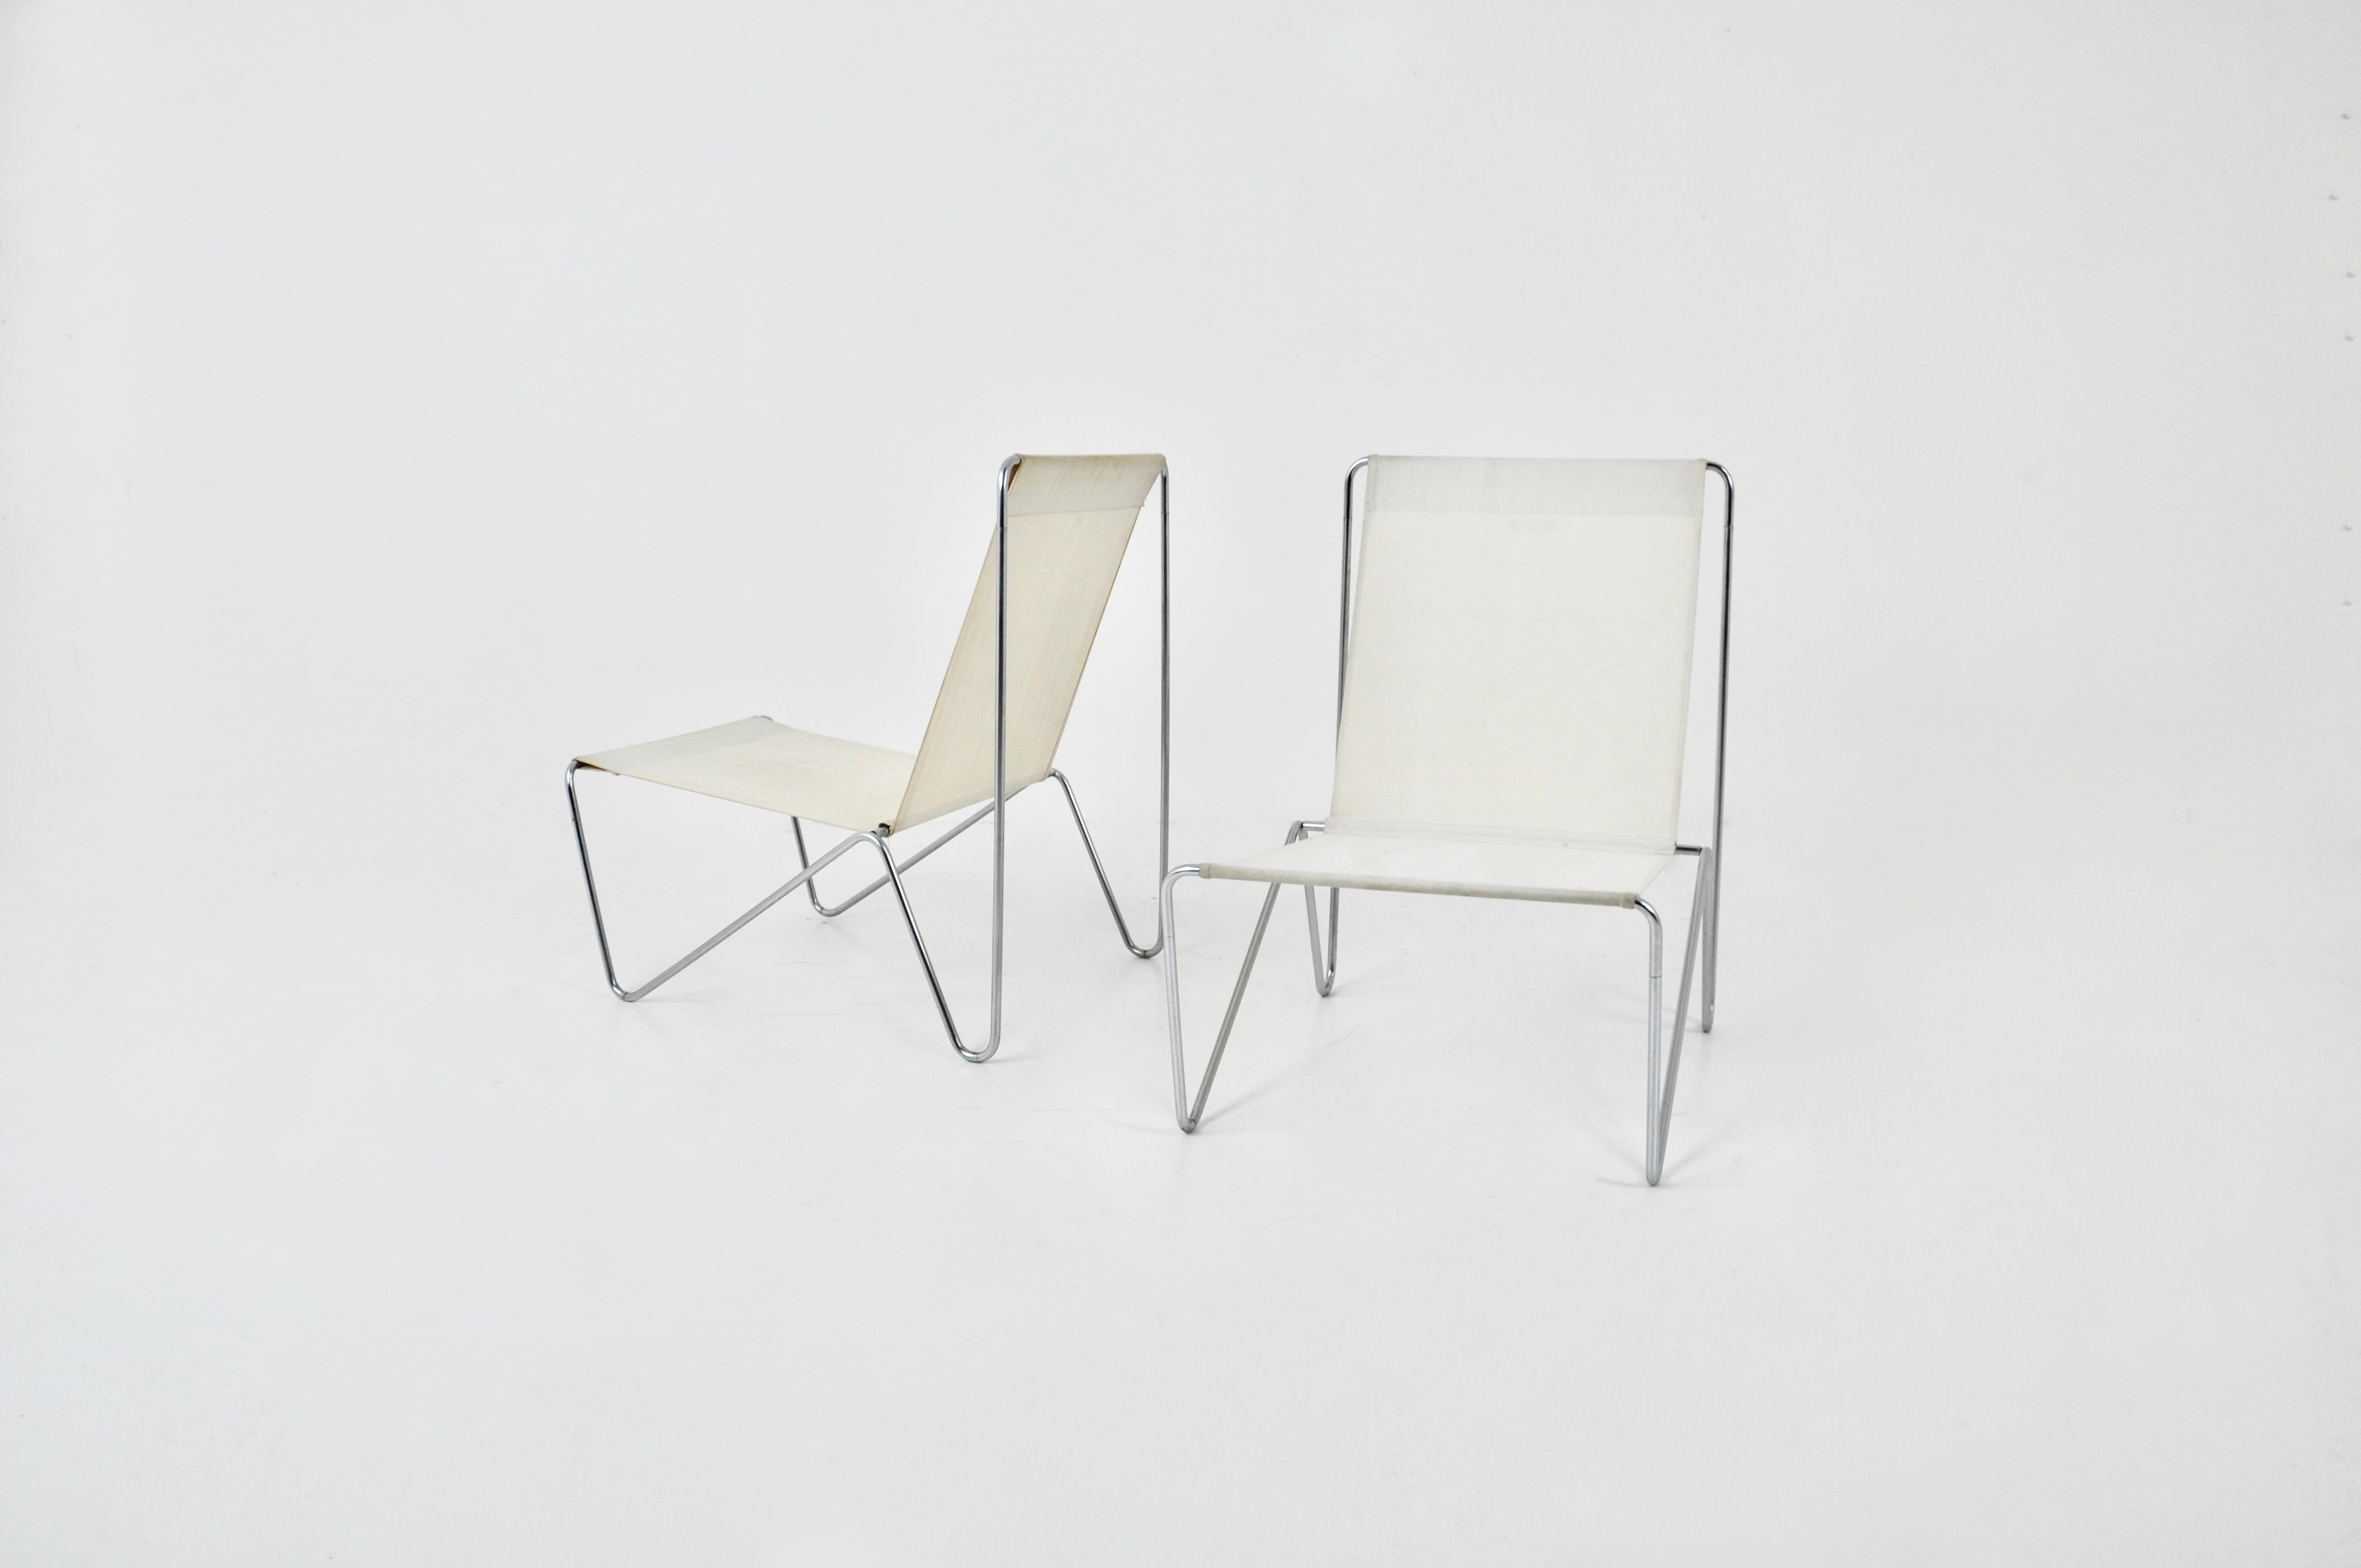 Pair of armchairs in white creame fabric with metal frame. Stamped on the back. Seat height: 33 cm. Wear due to time and age.